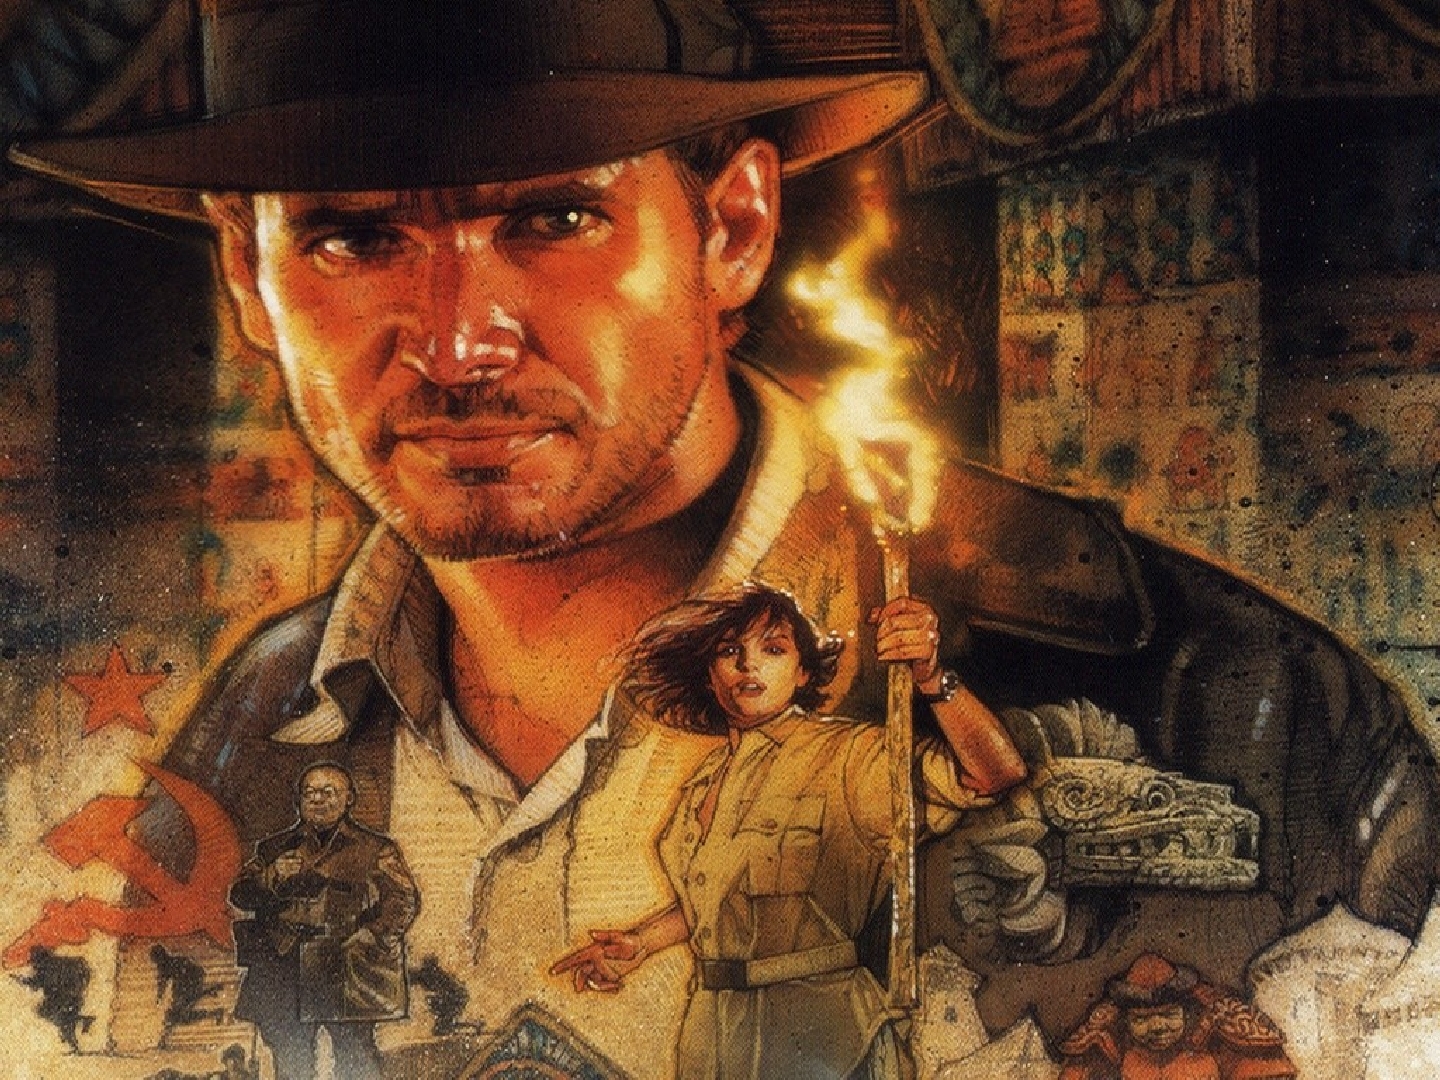 Indiana Jones And The Raiders Of The Lost Ark Wallpapers